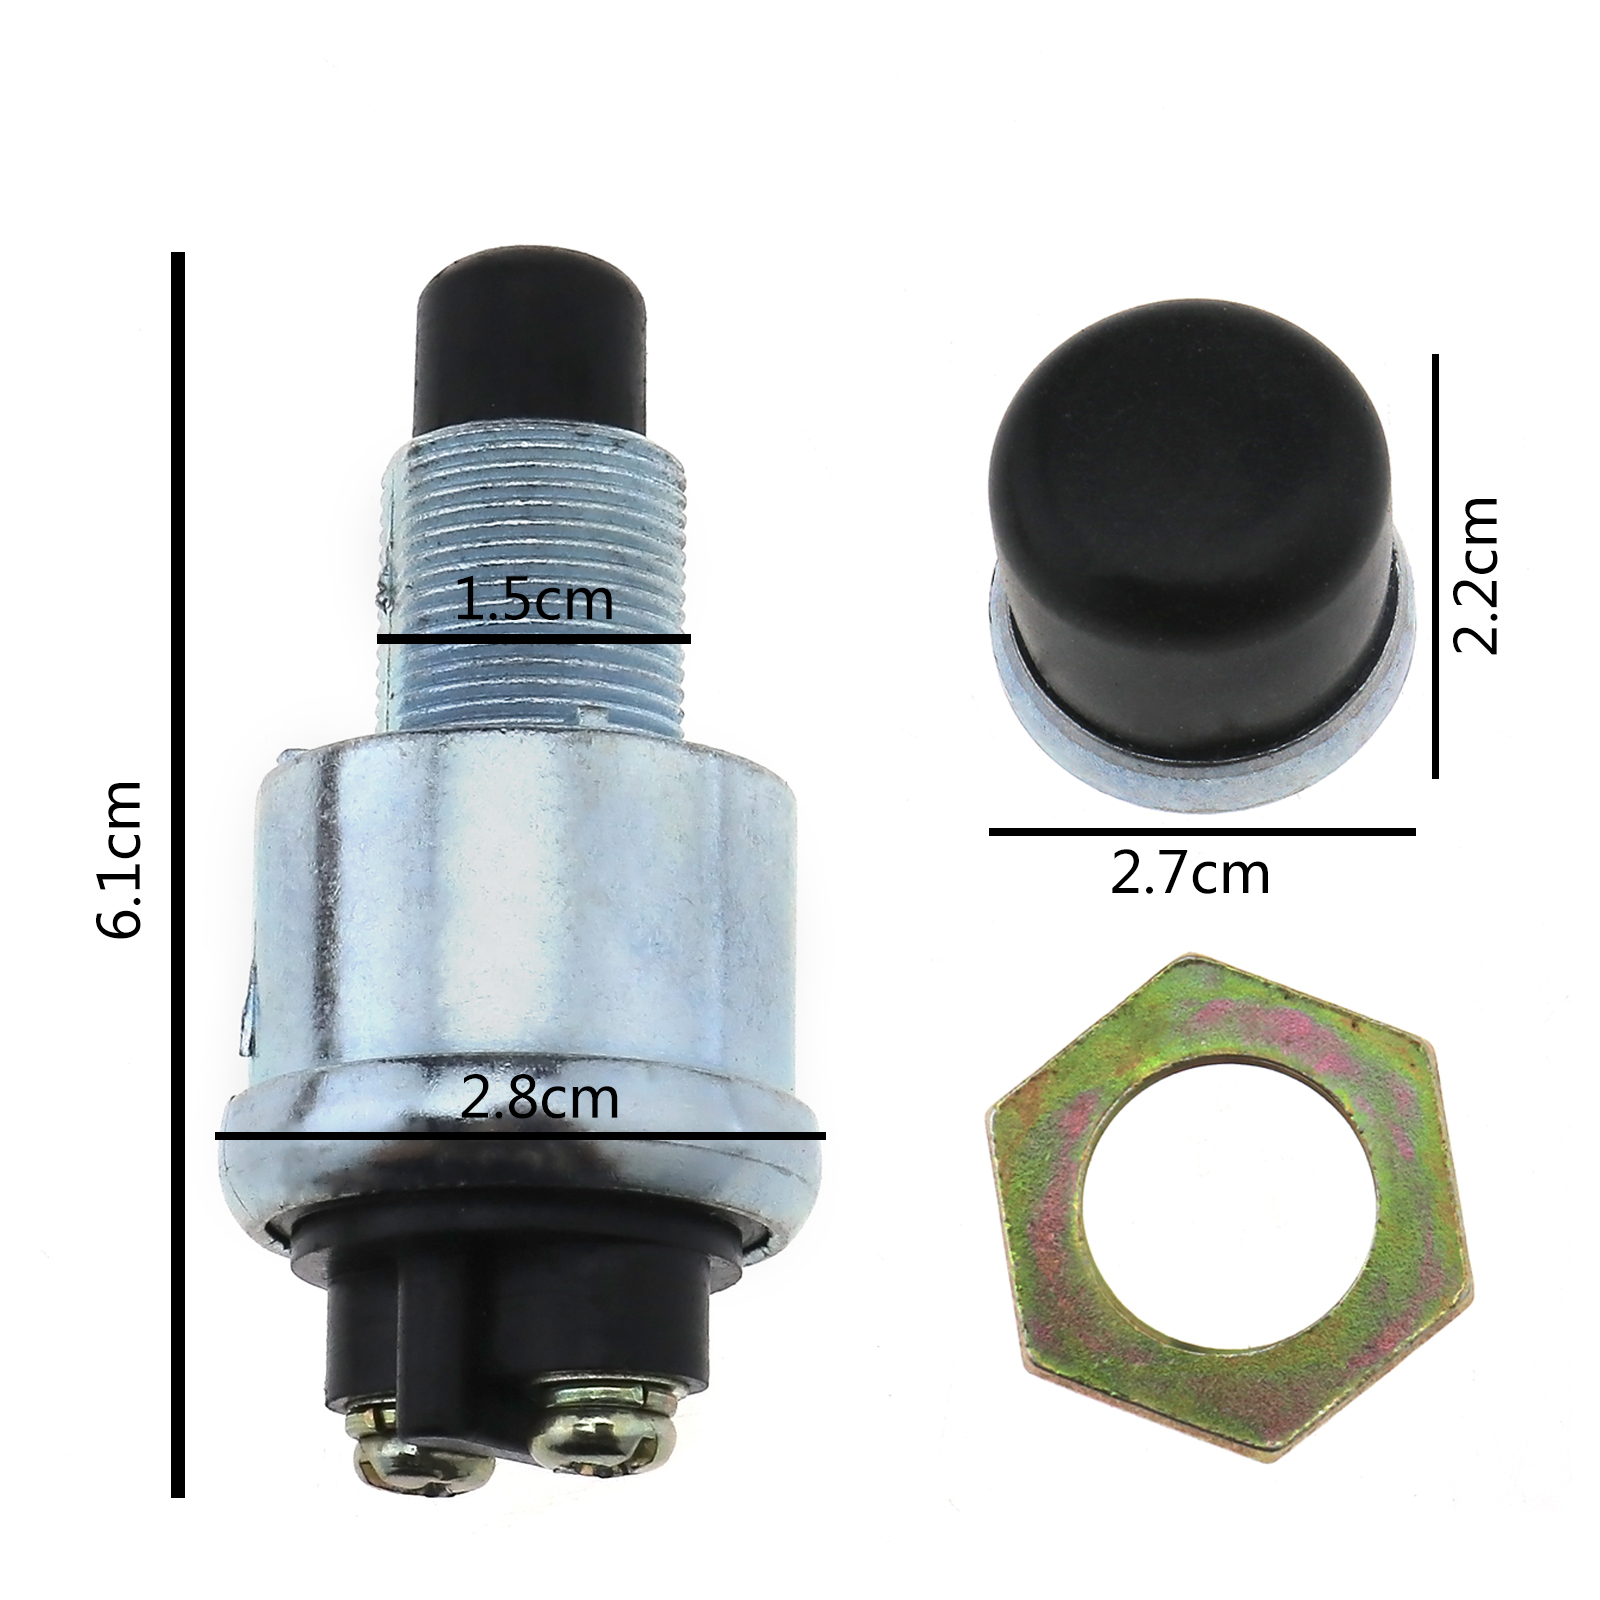 push button ignition switch